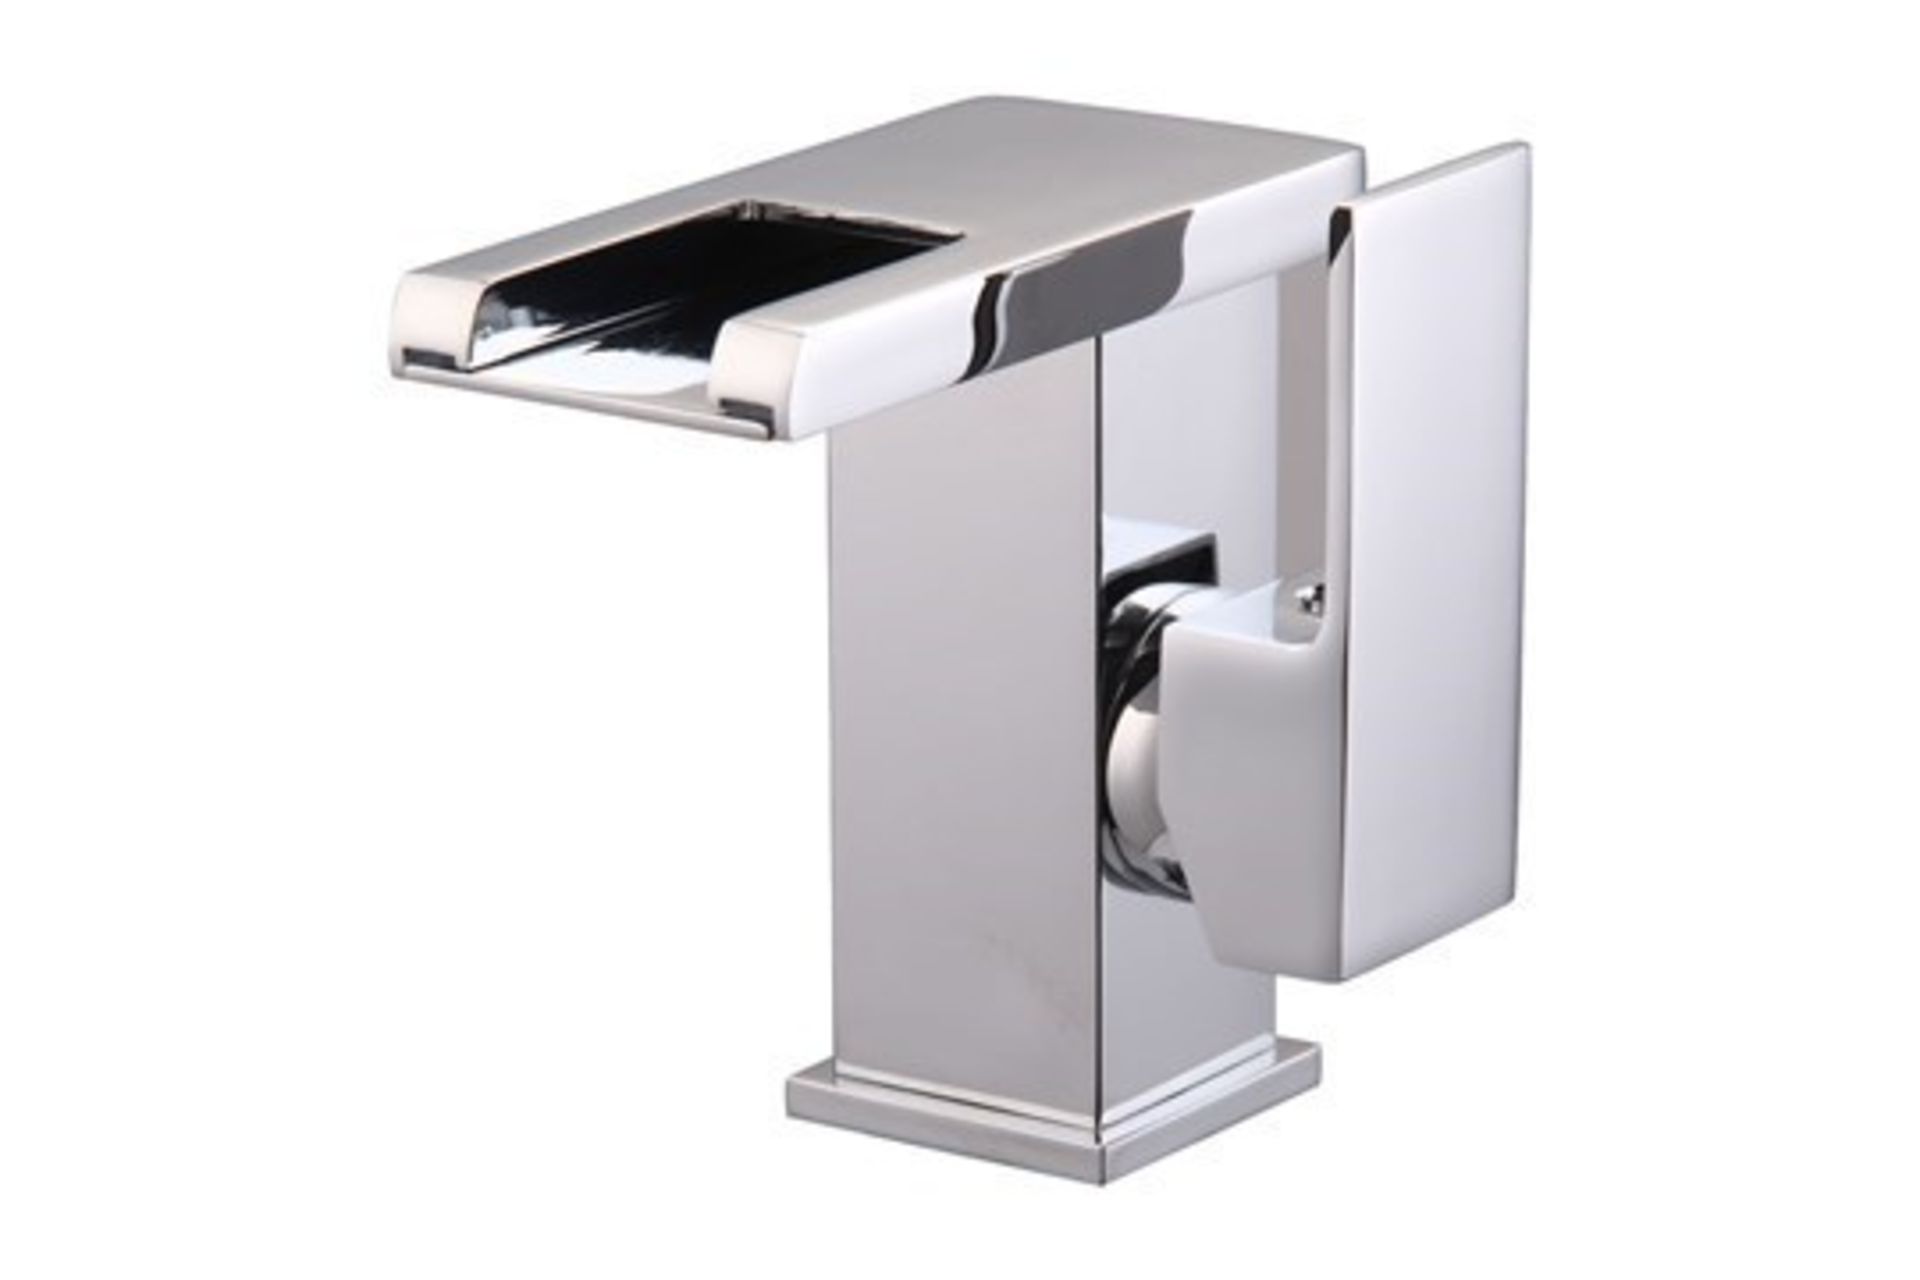 (OS254) LED Waterfall Bathroom Basin Mixer Tap. RRP £229.99. Easy to install and clean. All copper - Image 3 of 3